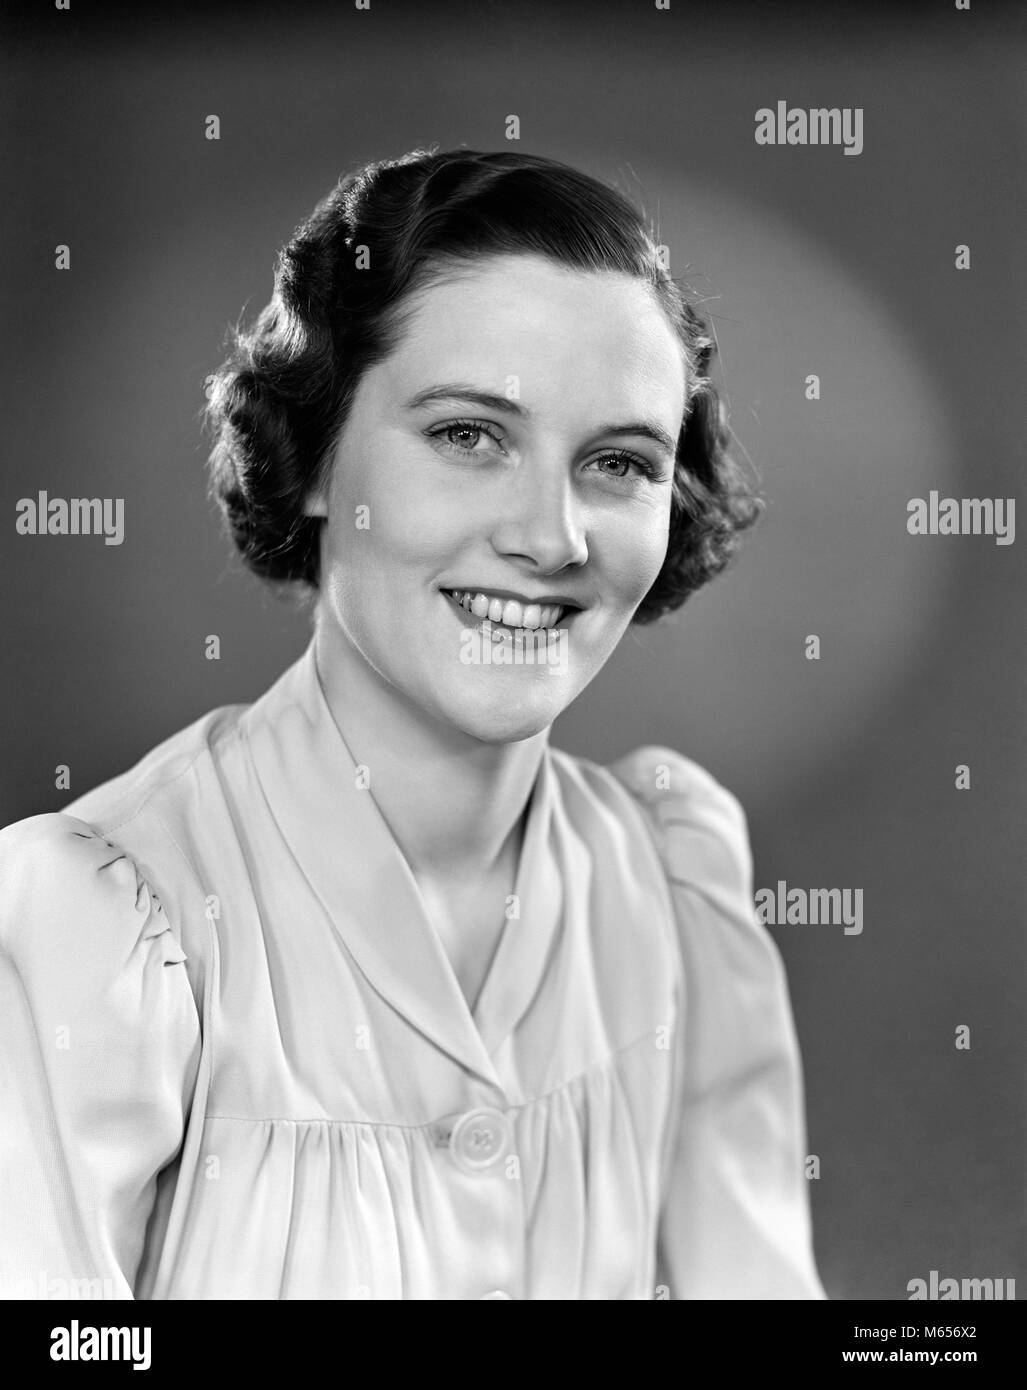 1930s 1940s PORTRAIT OF SMILING WOMAN WEARING BUTTON DOWN BLOUSE LOOKING AT CAMERA - g1974 HAR001 HARS HAPPINESS HEAD AND SHOULDERS CHEERFUL BLOUSE SMILES JOYFUL MID-ADULT MID-ADULT WOMAN PEOPLE ADULTS B&W BLACK AND WHITE CAUCASIAN ETHNICITY LOOKING AT CAMERA OLD FASHIONED PERSONS Stock Photo